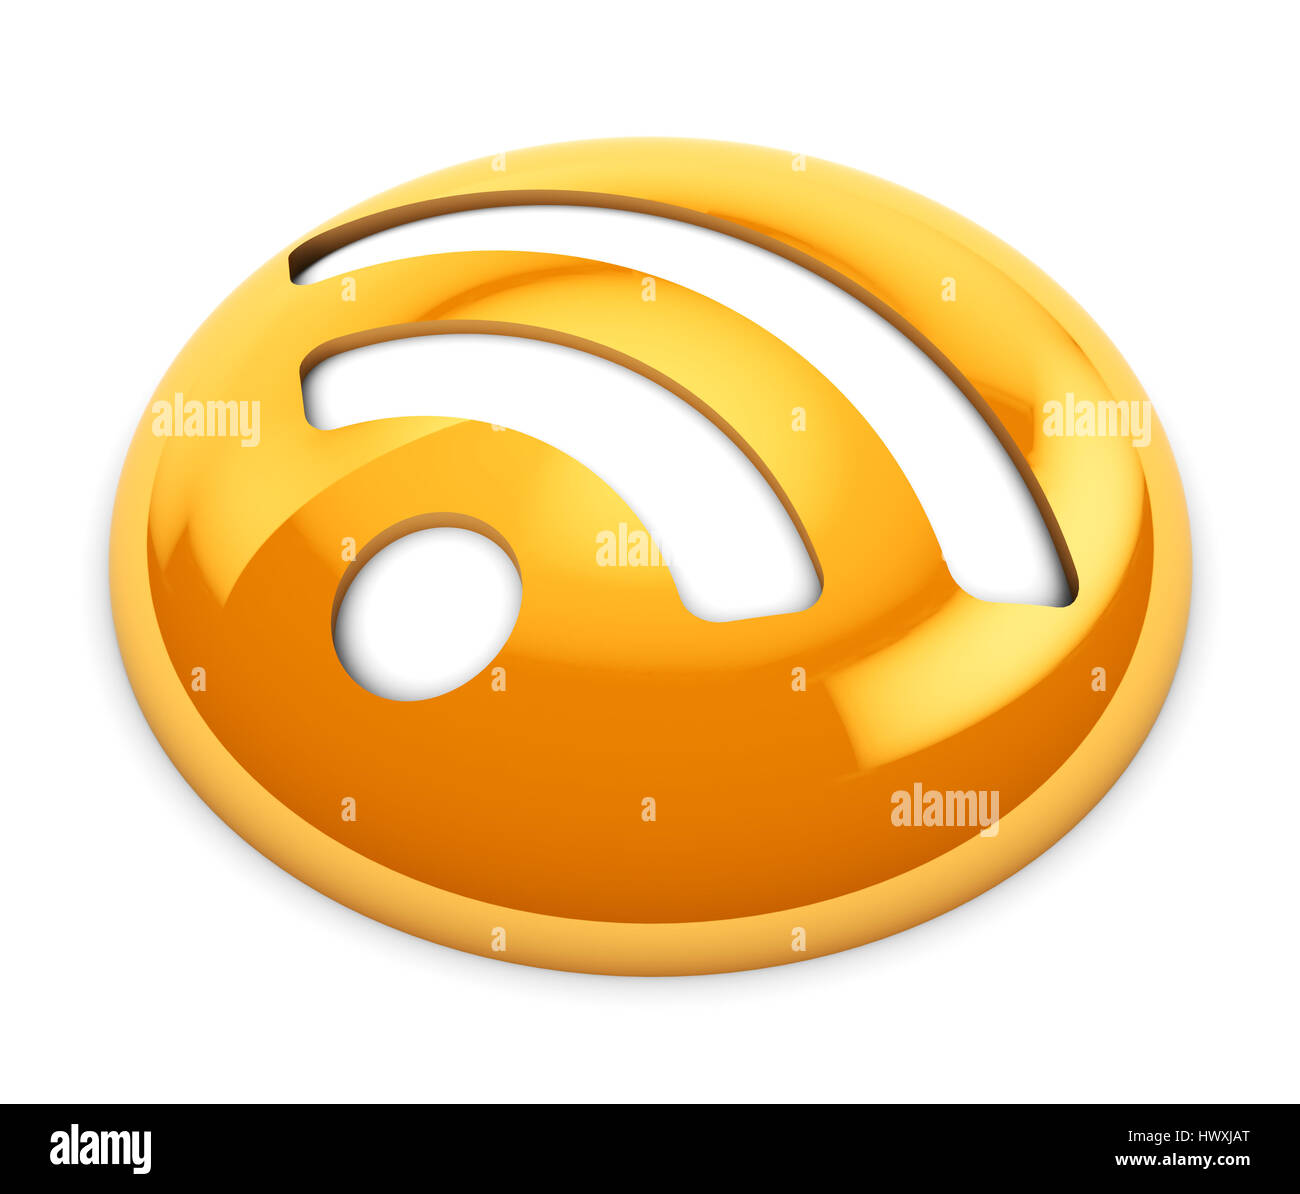 3d illustration of gloss orange rss icon or button, over white background  Stock Photo - Alamy